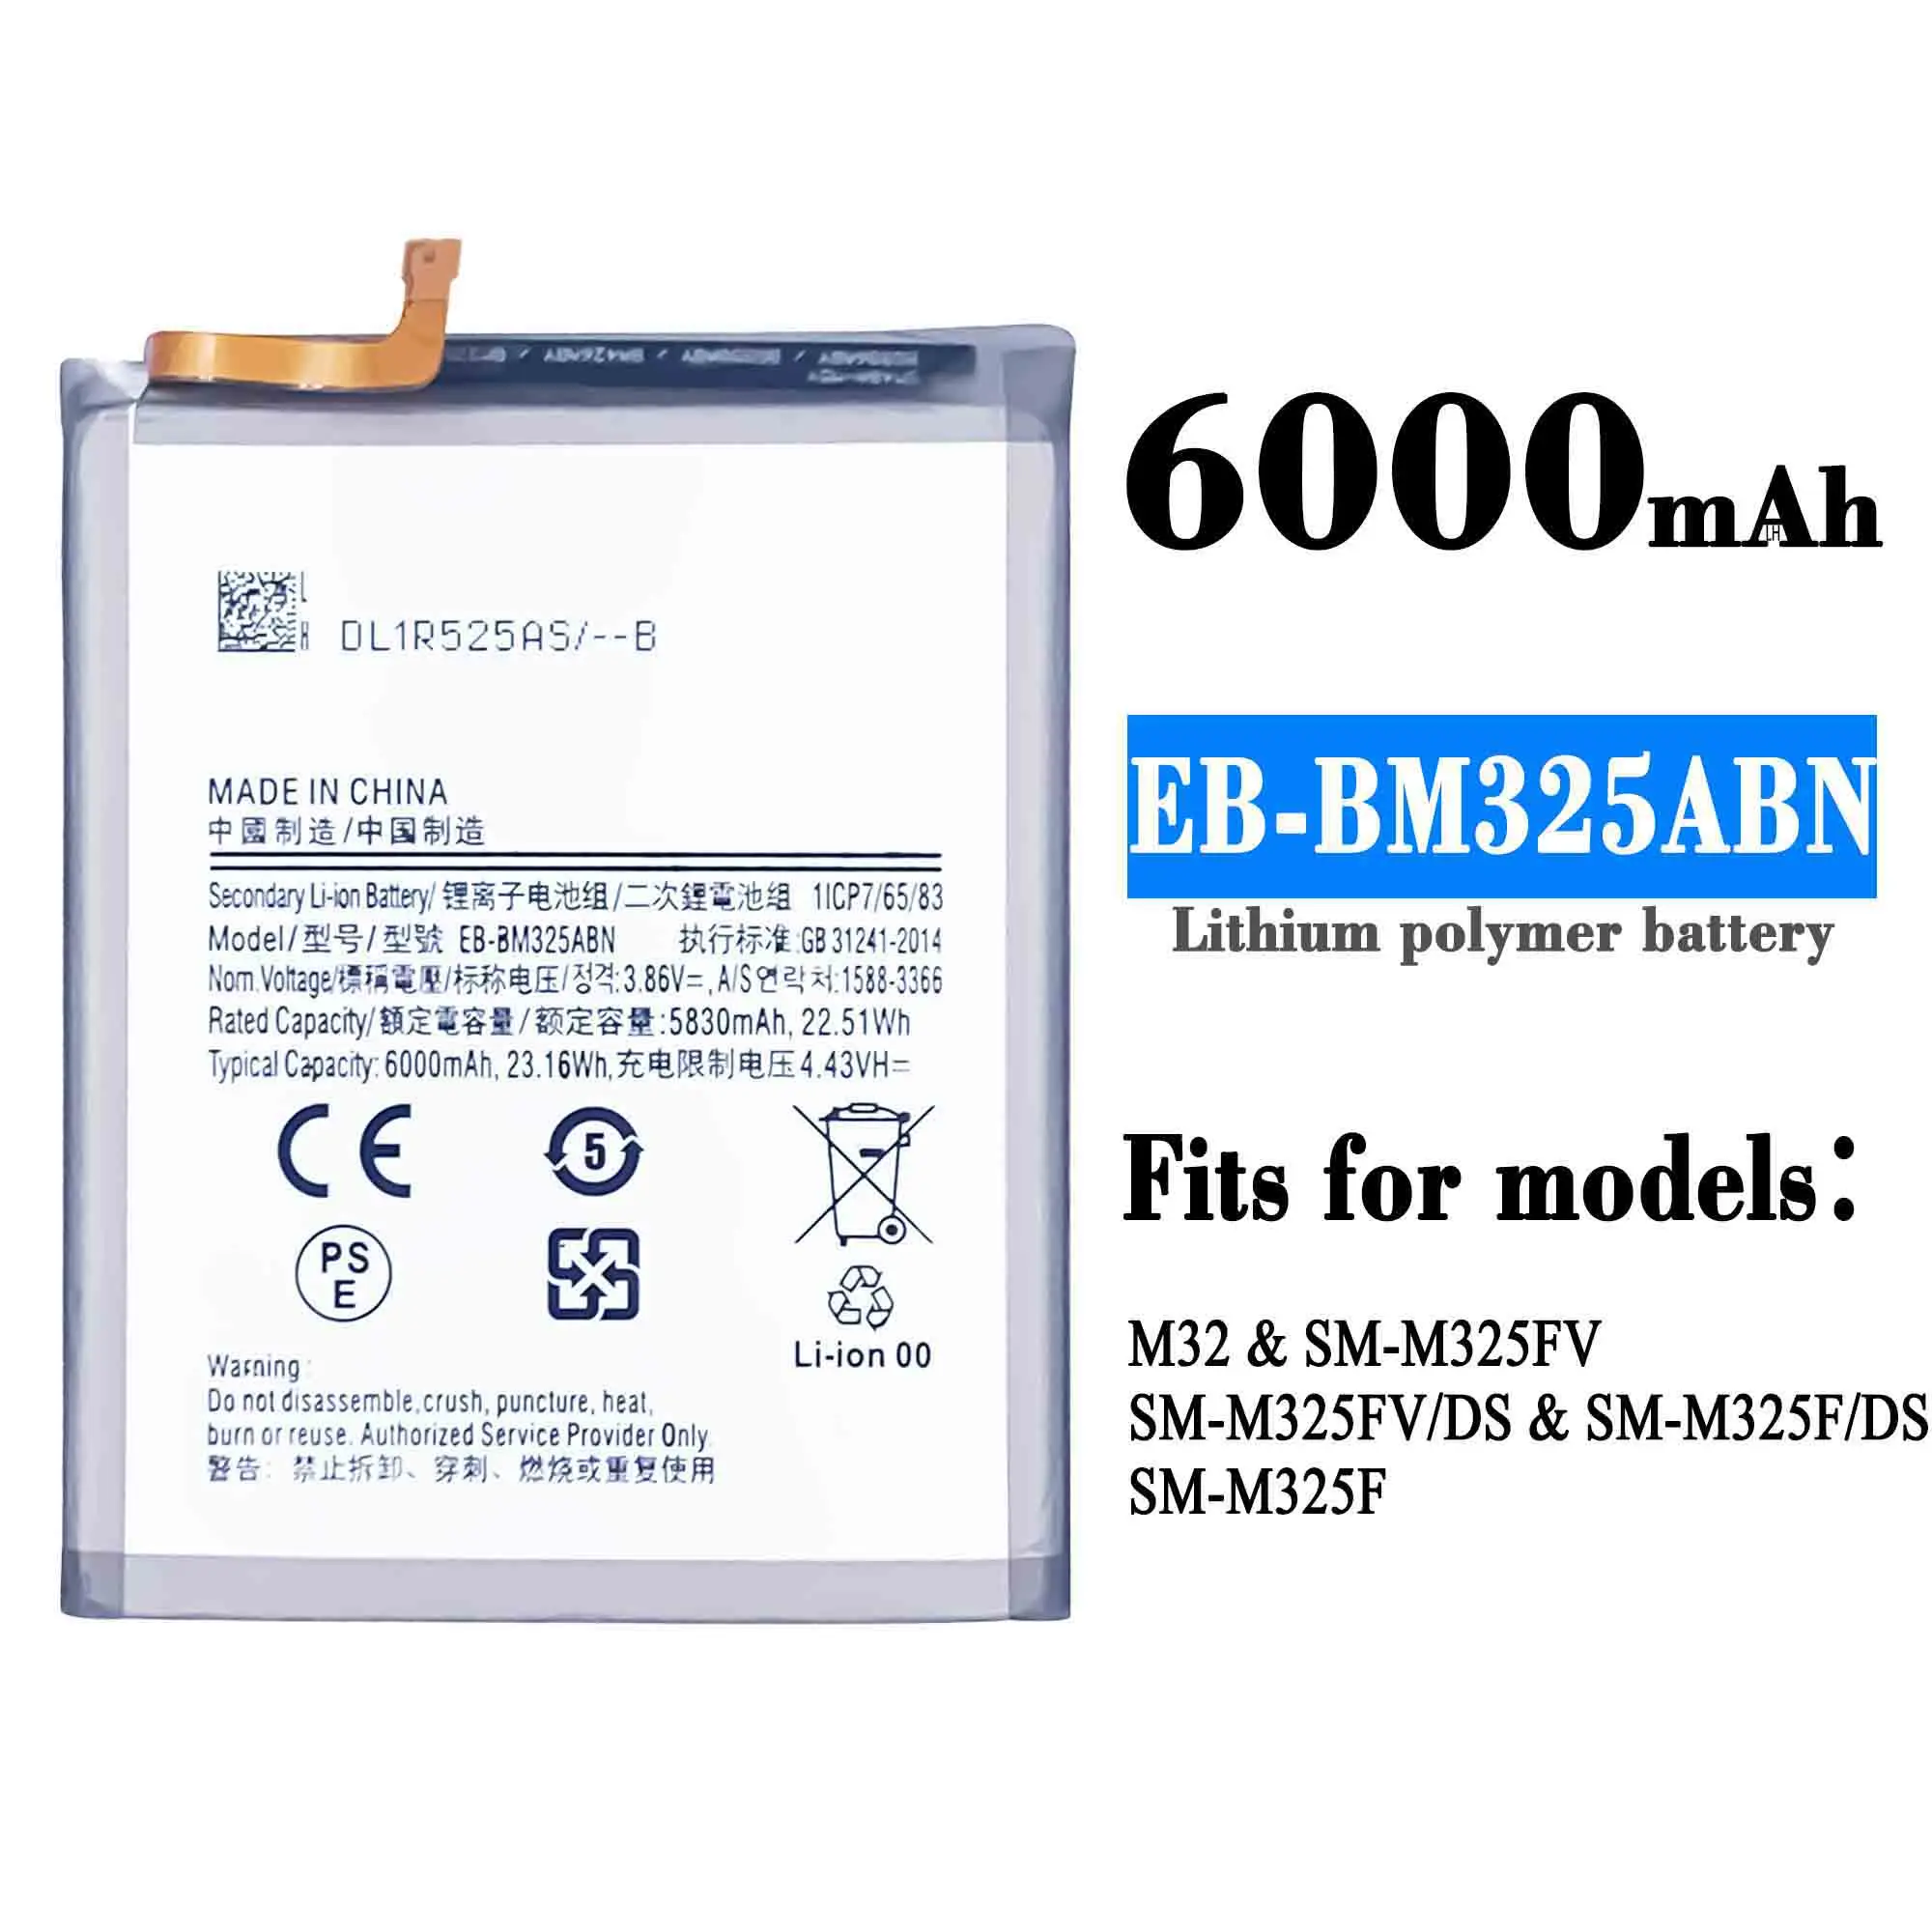 New Battery 6000mAh/23.16Wh EB-BM325ABN Battery For Samsung Galaxy EB-BM325ABN Mobile Phone Batteries